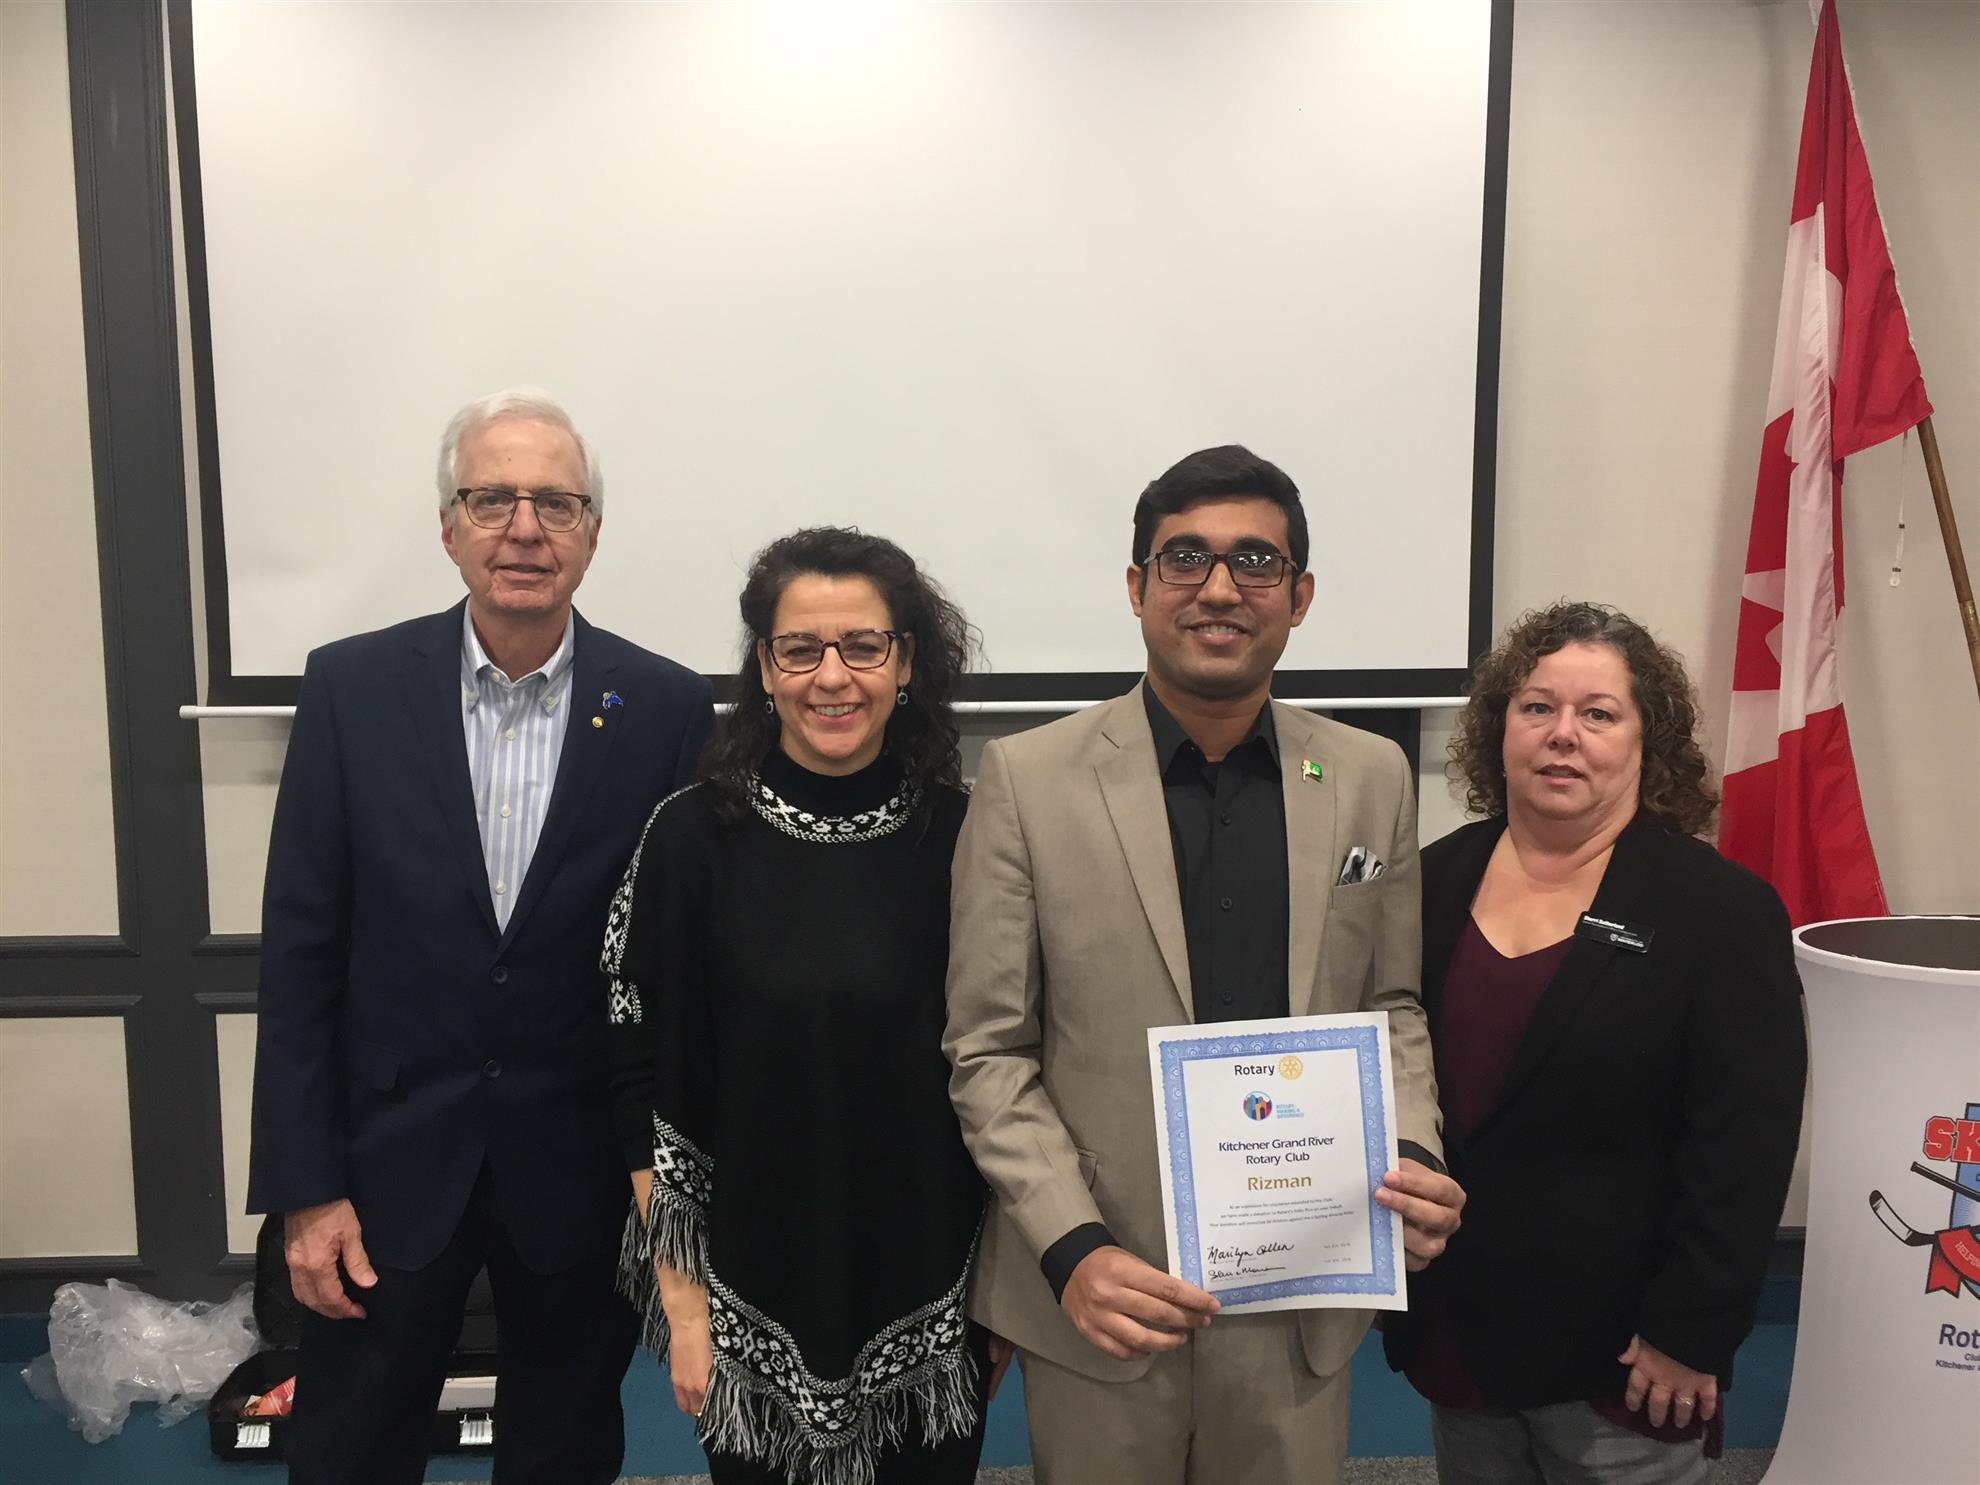 Rizwan joined by Ernie Ginzler and two faculty members Jennifer Ball and Sherri Sutherland.